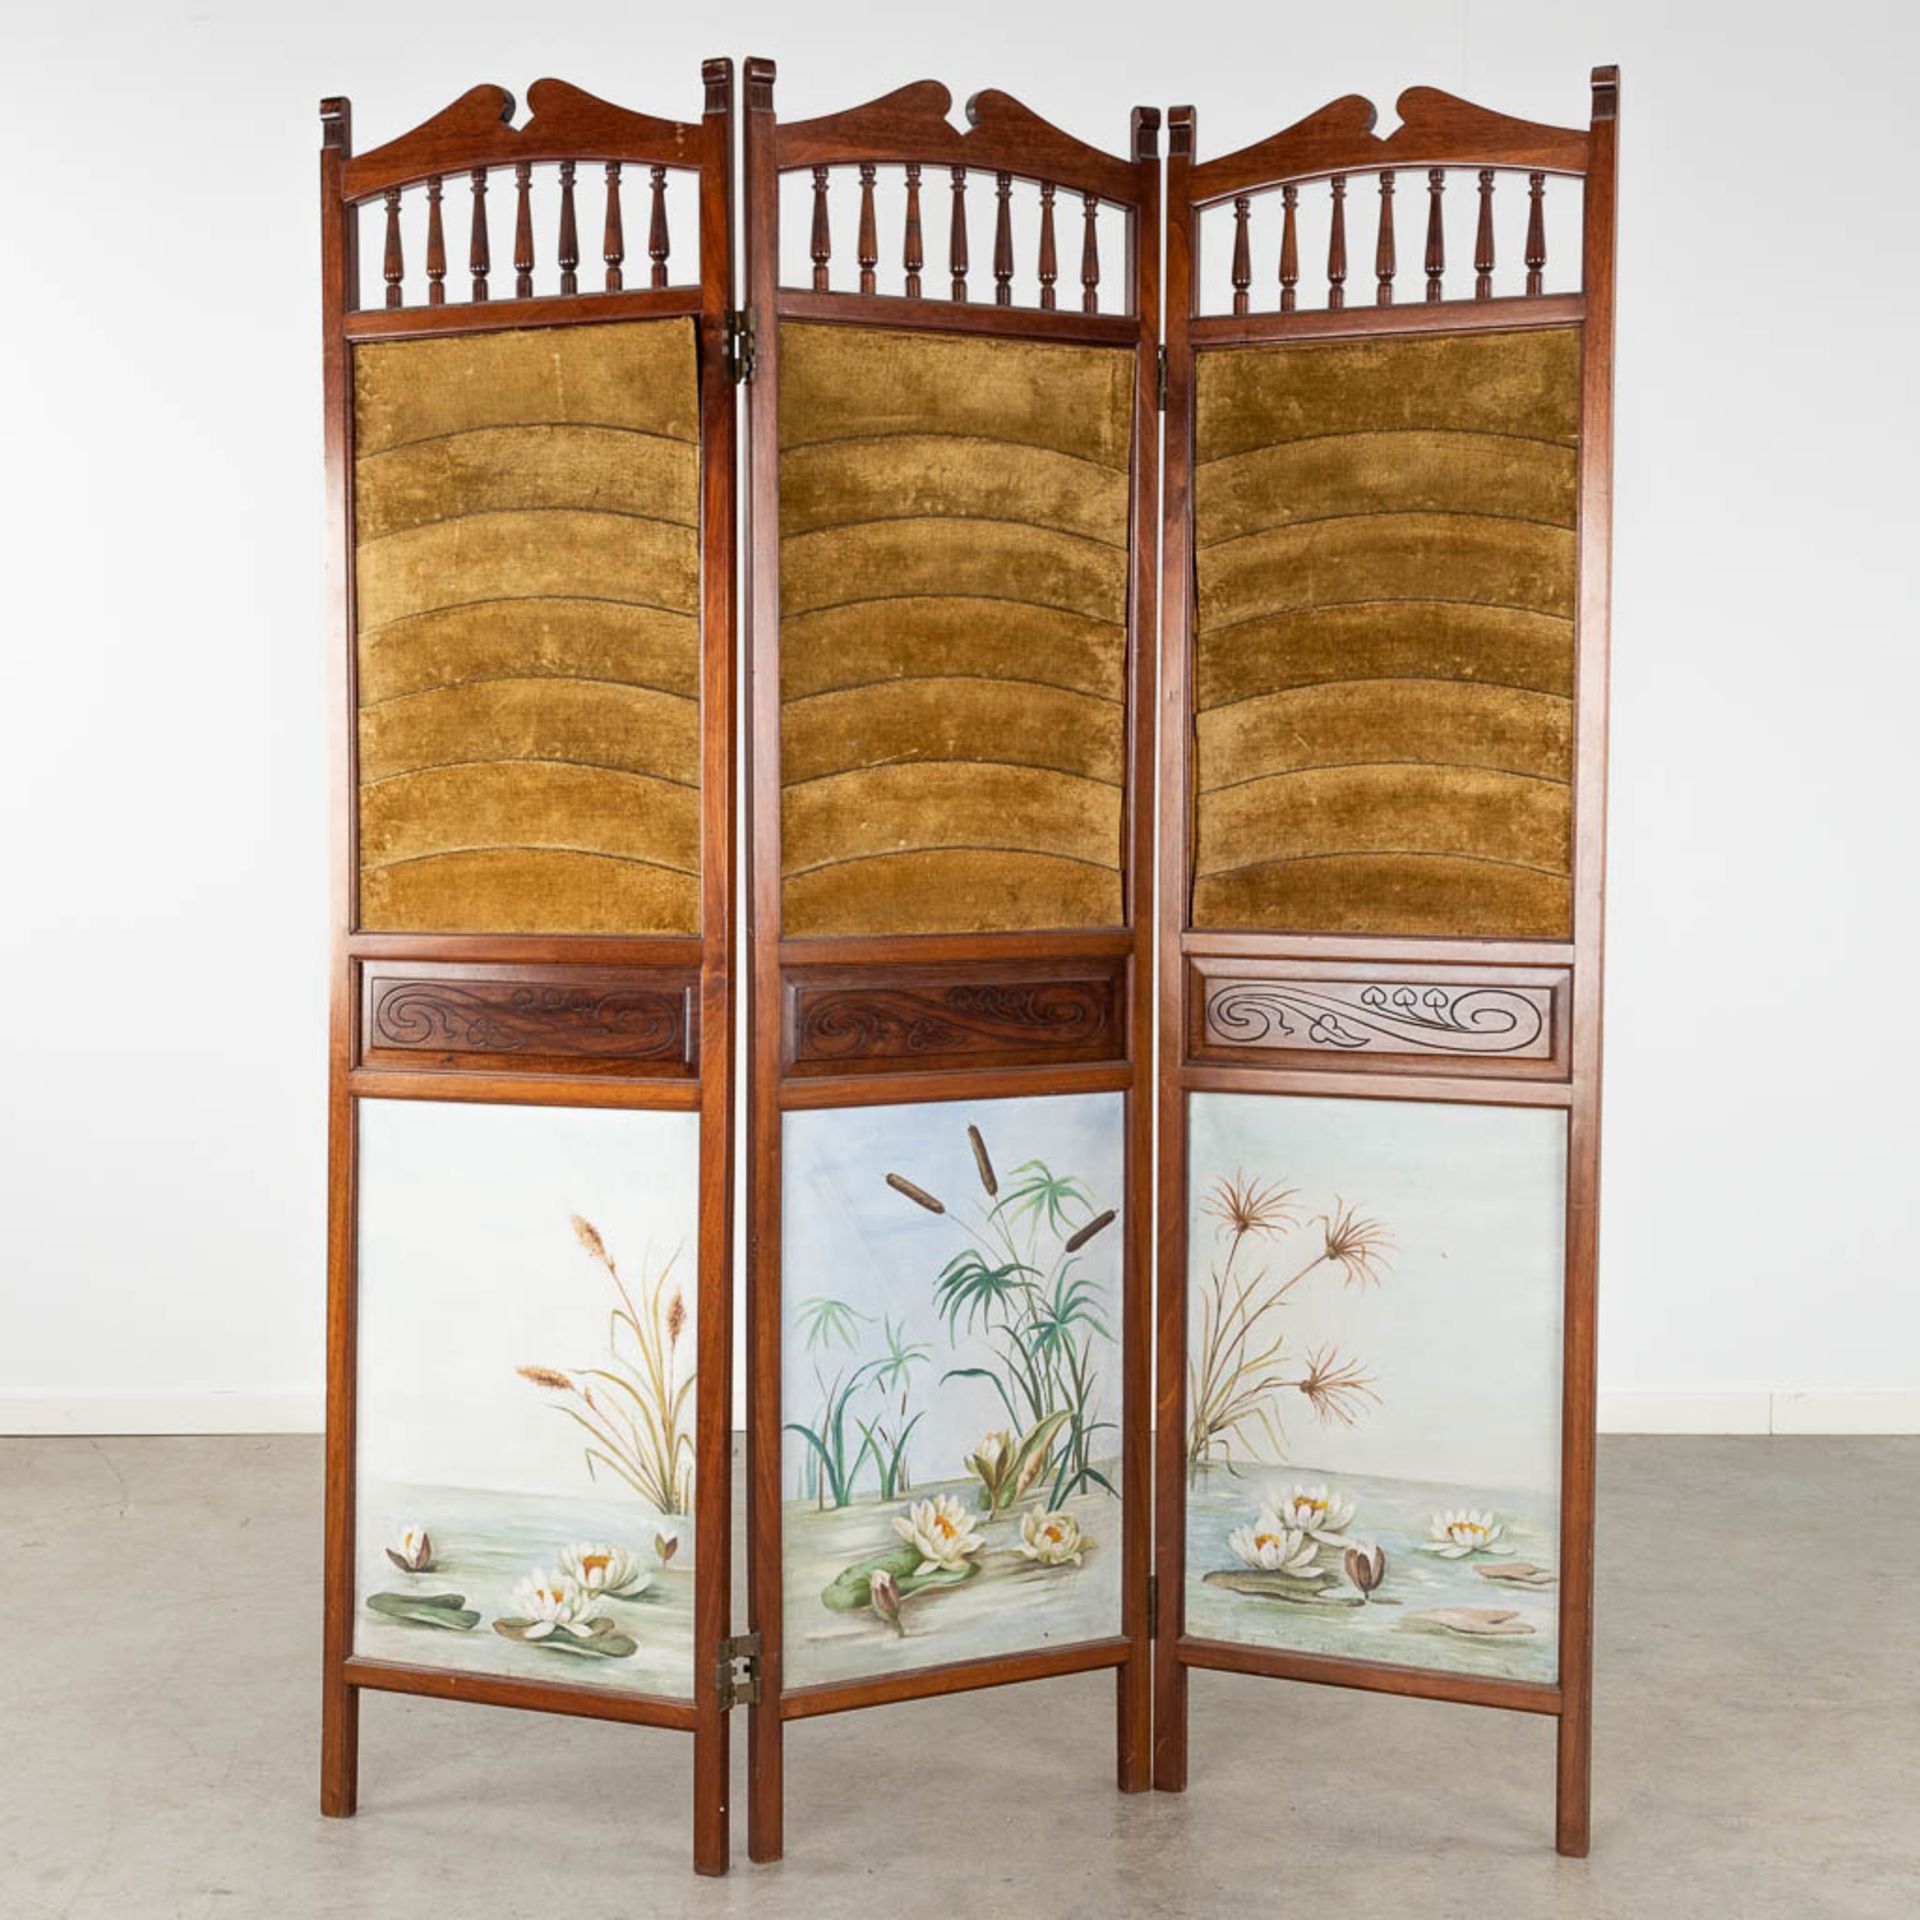 A room divider with painting and &quot;pêle mêle&quot; oil on canvas. (D:180 x W:143 cm)